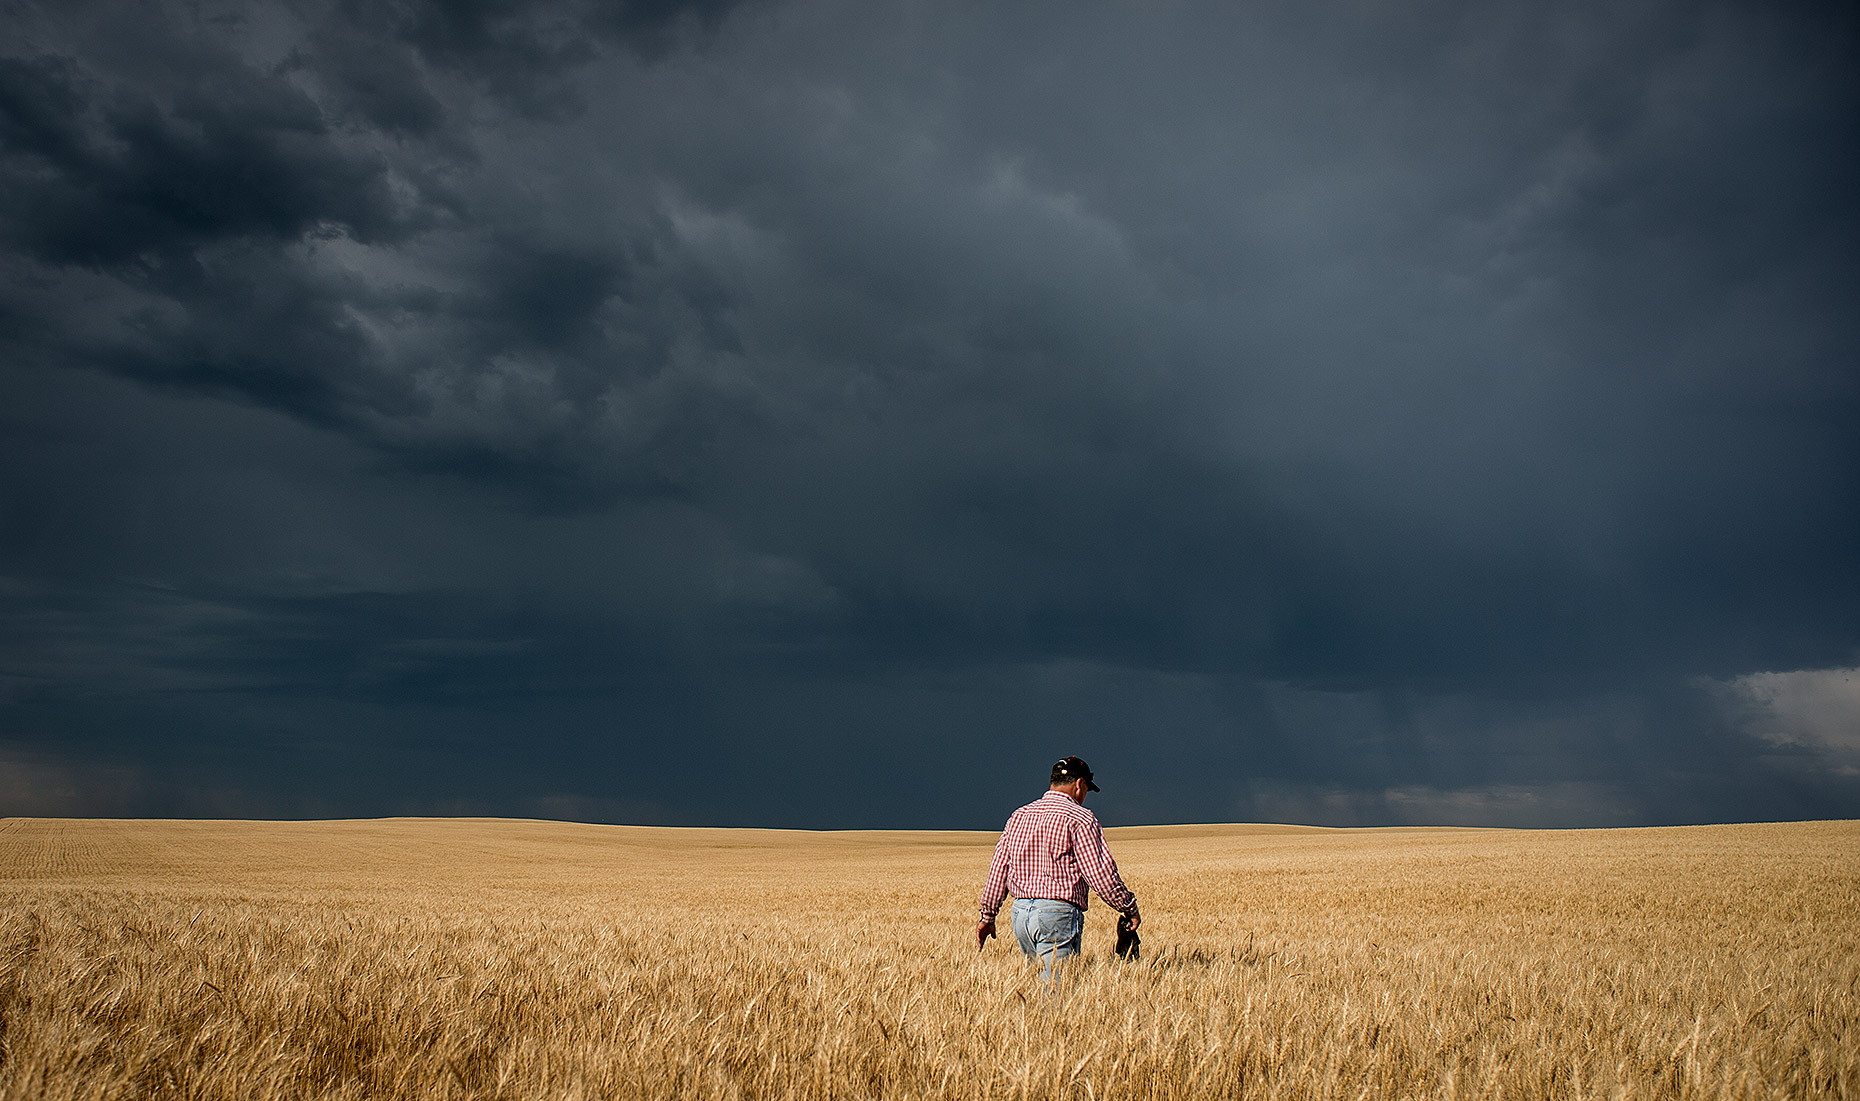 Farmer in Wheat Field with Thunderstorm